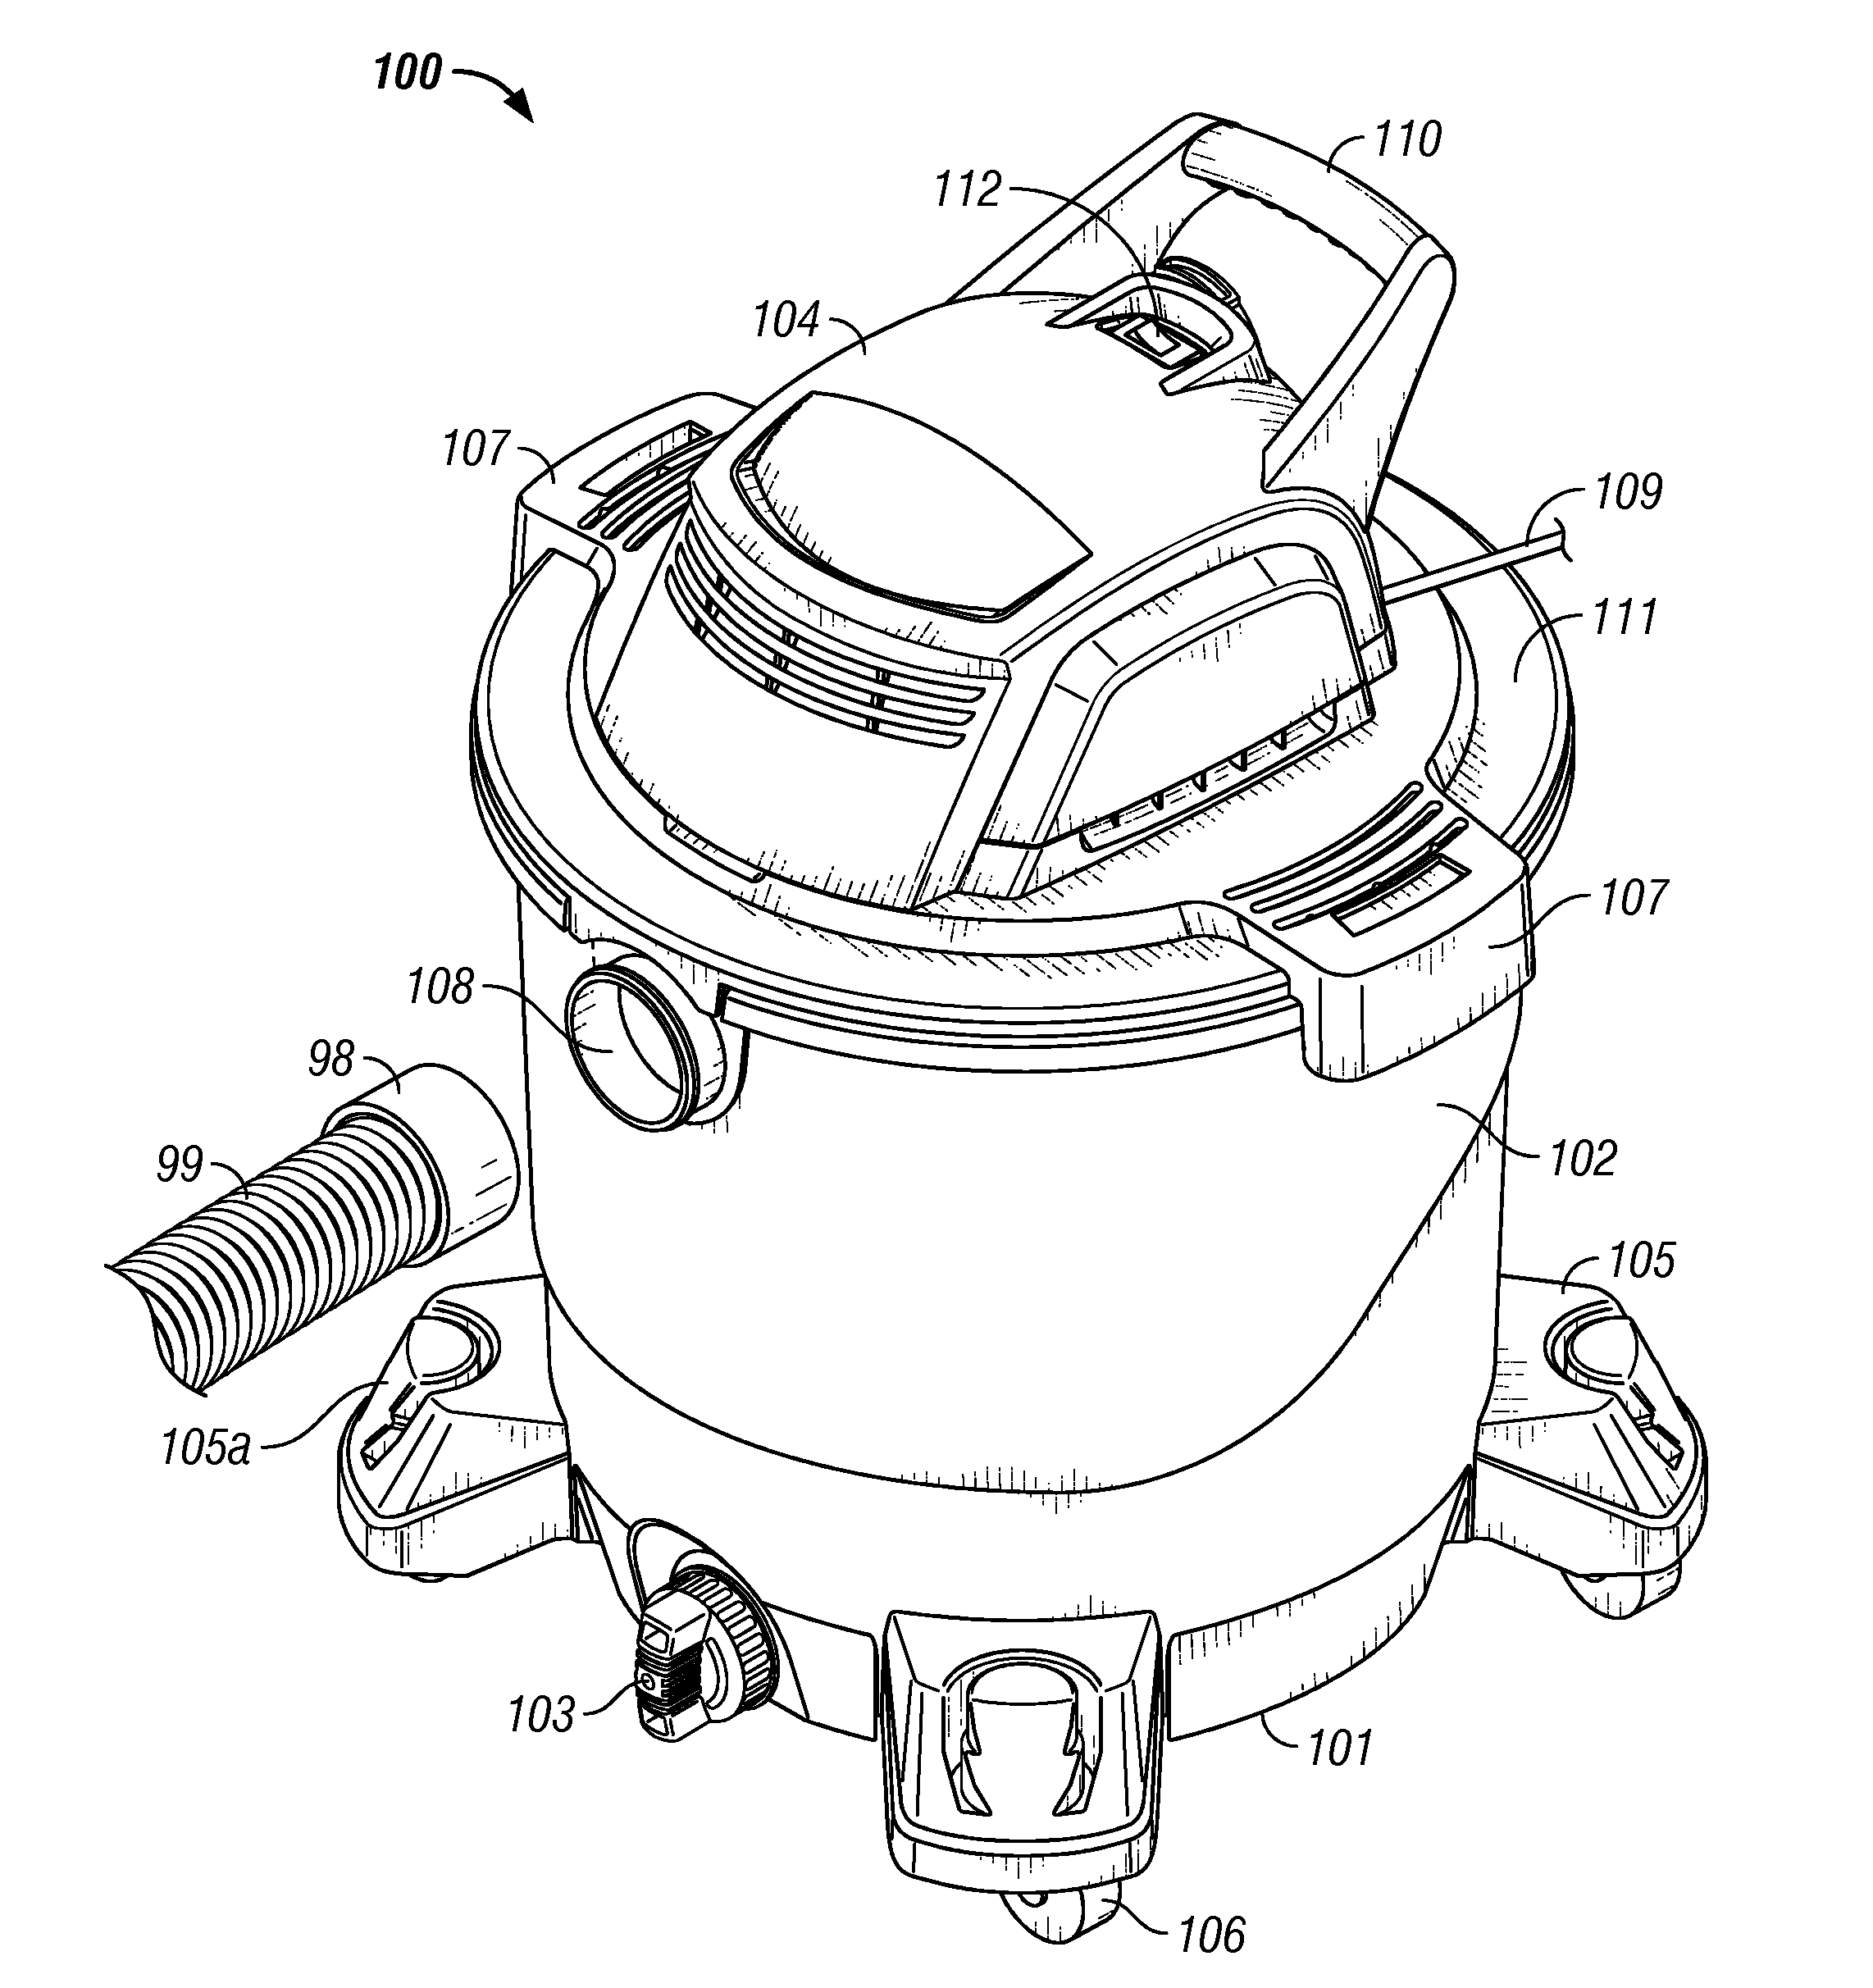 Vacuum Bypass Vent and Vacuums Incorporating Such Bypass Vents